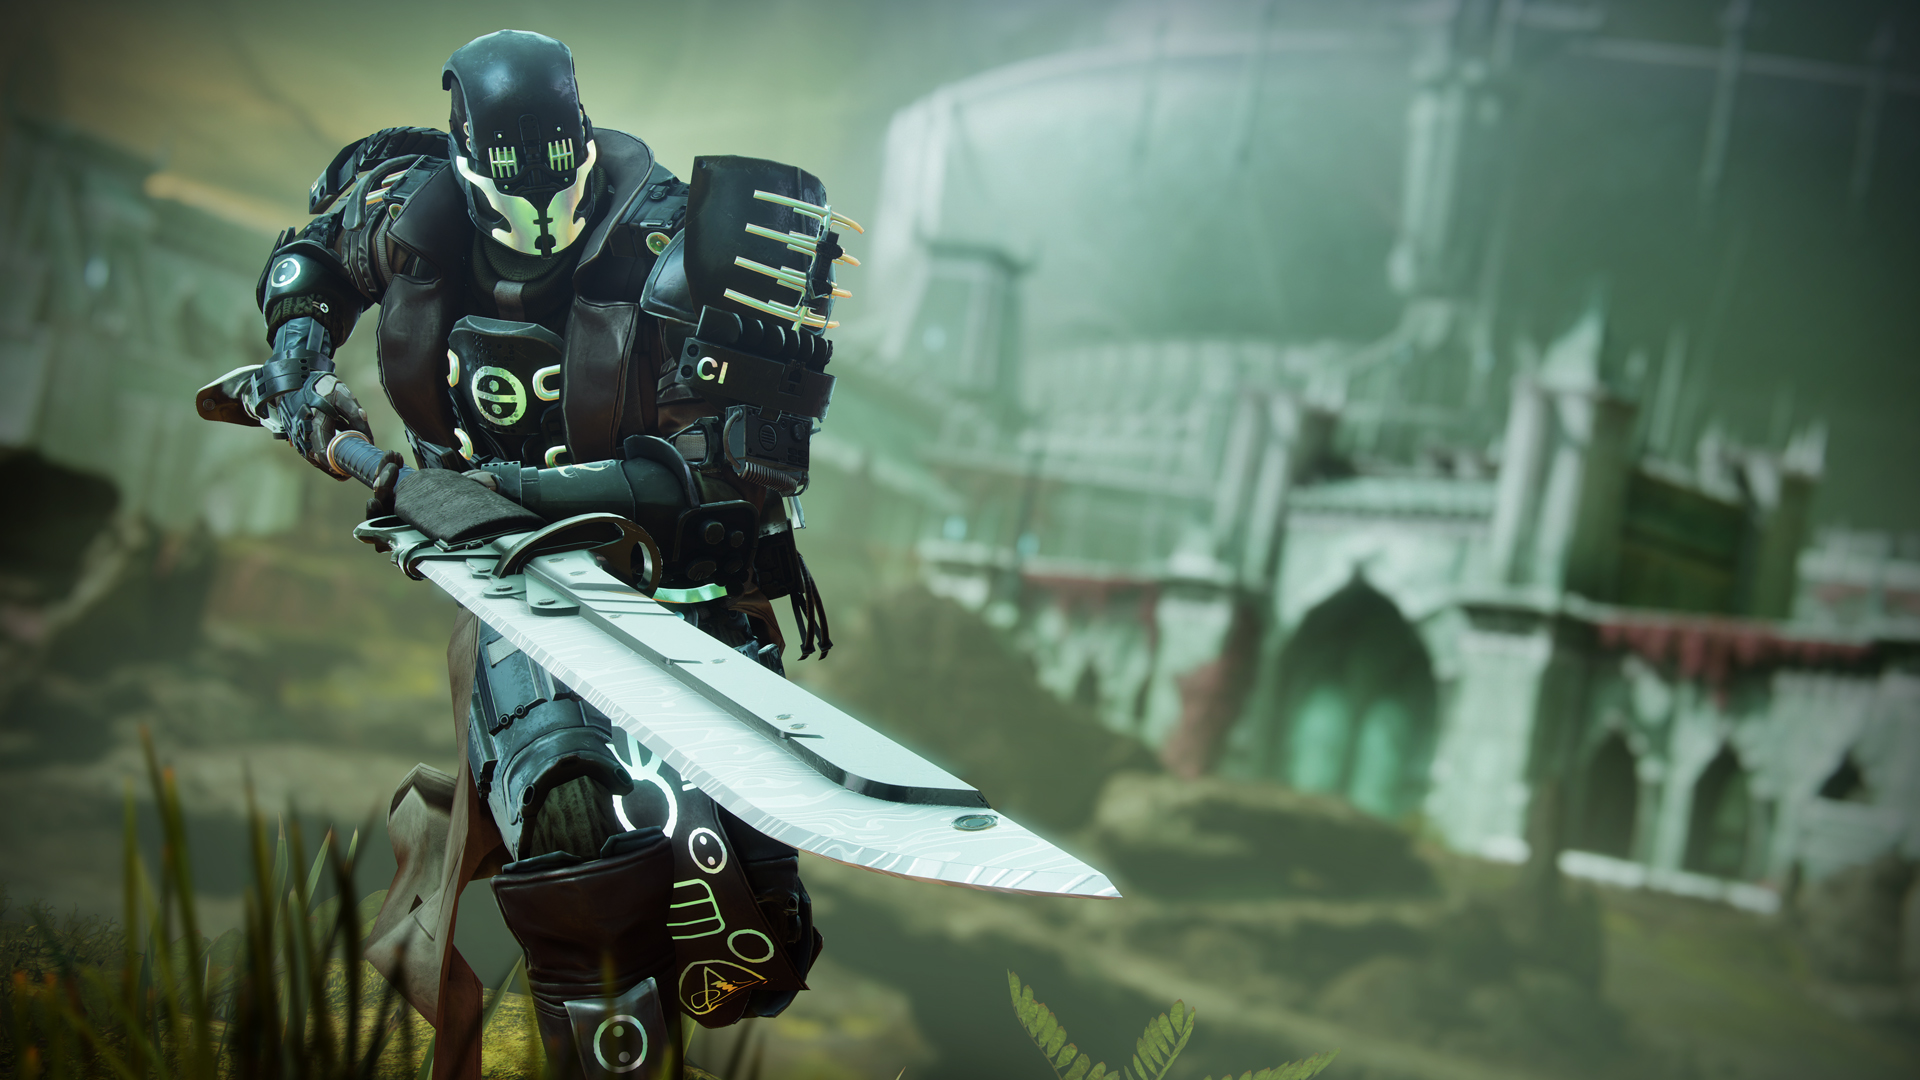 Destiny 2 screenshots from The Witch Queen expansion